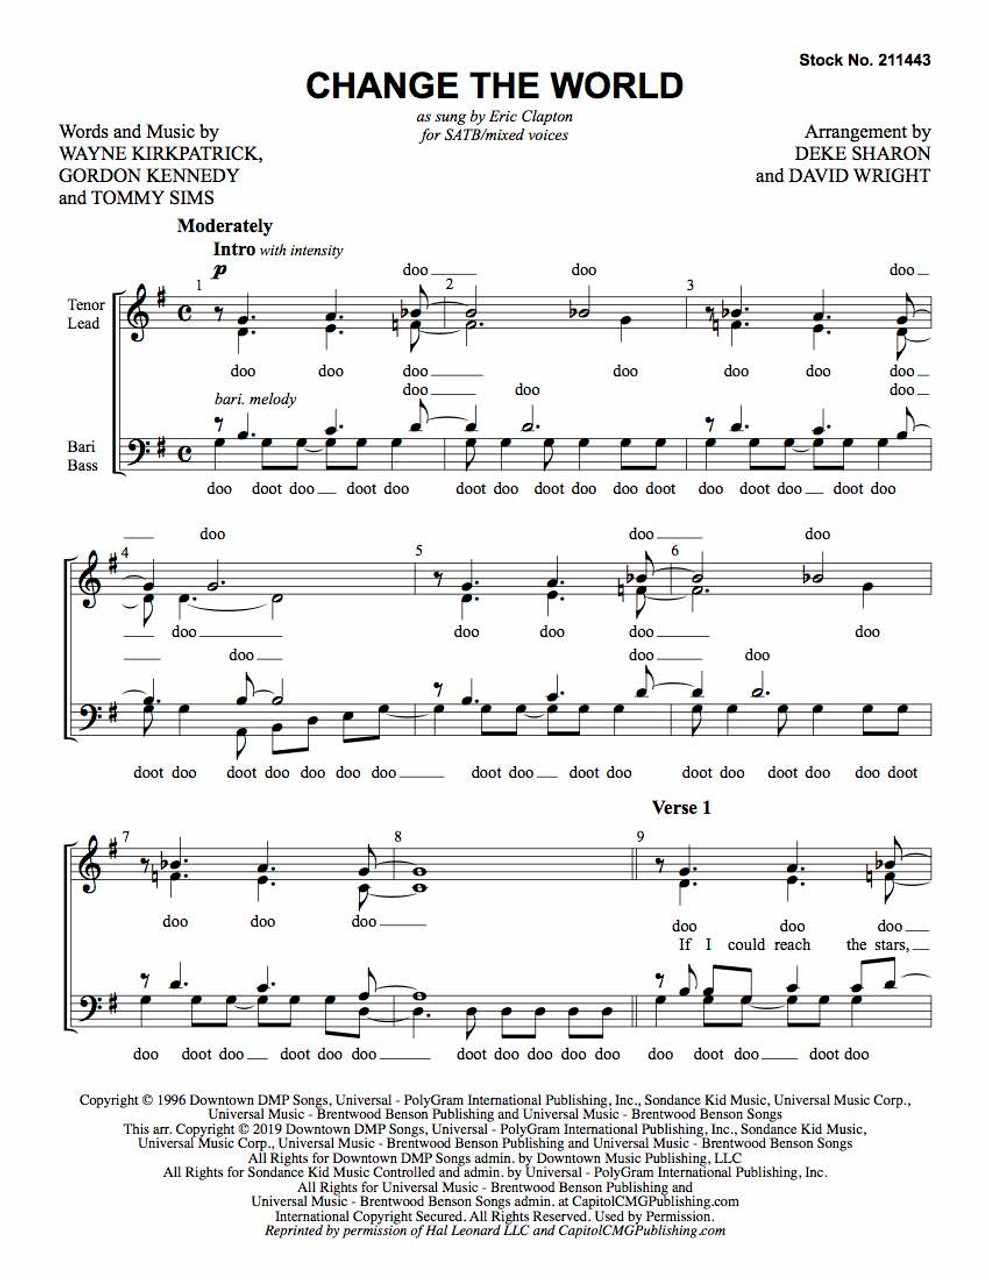 Change the World (SATB) (arr. Sharon & Wright) - Download